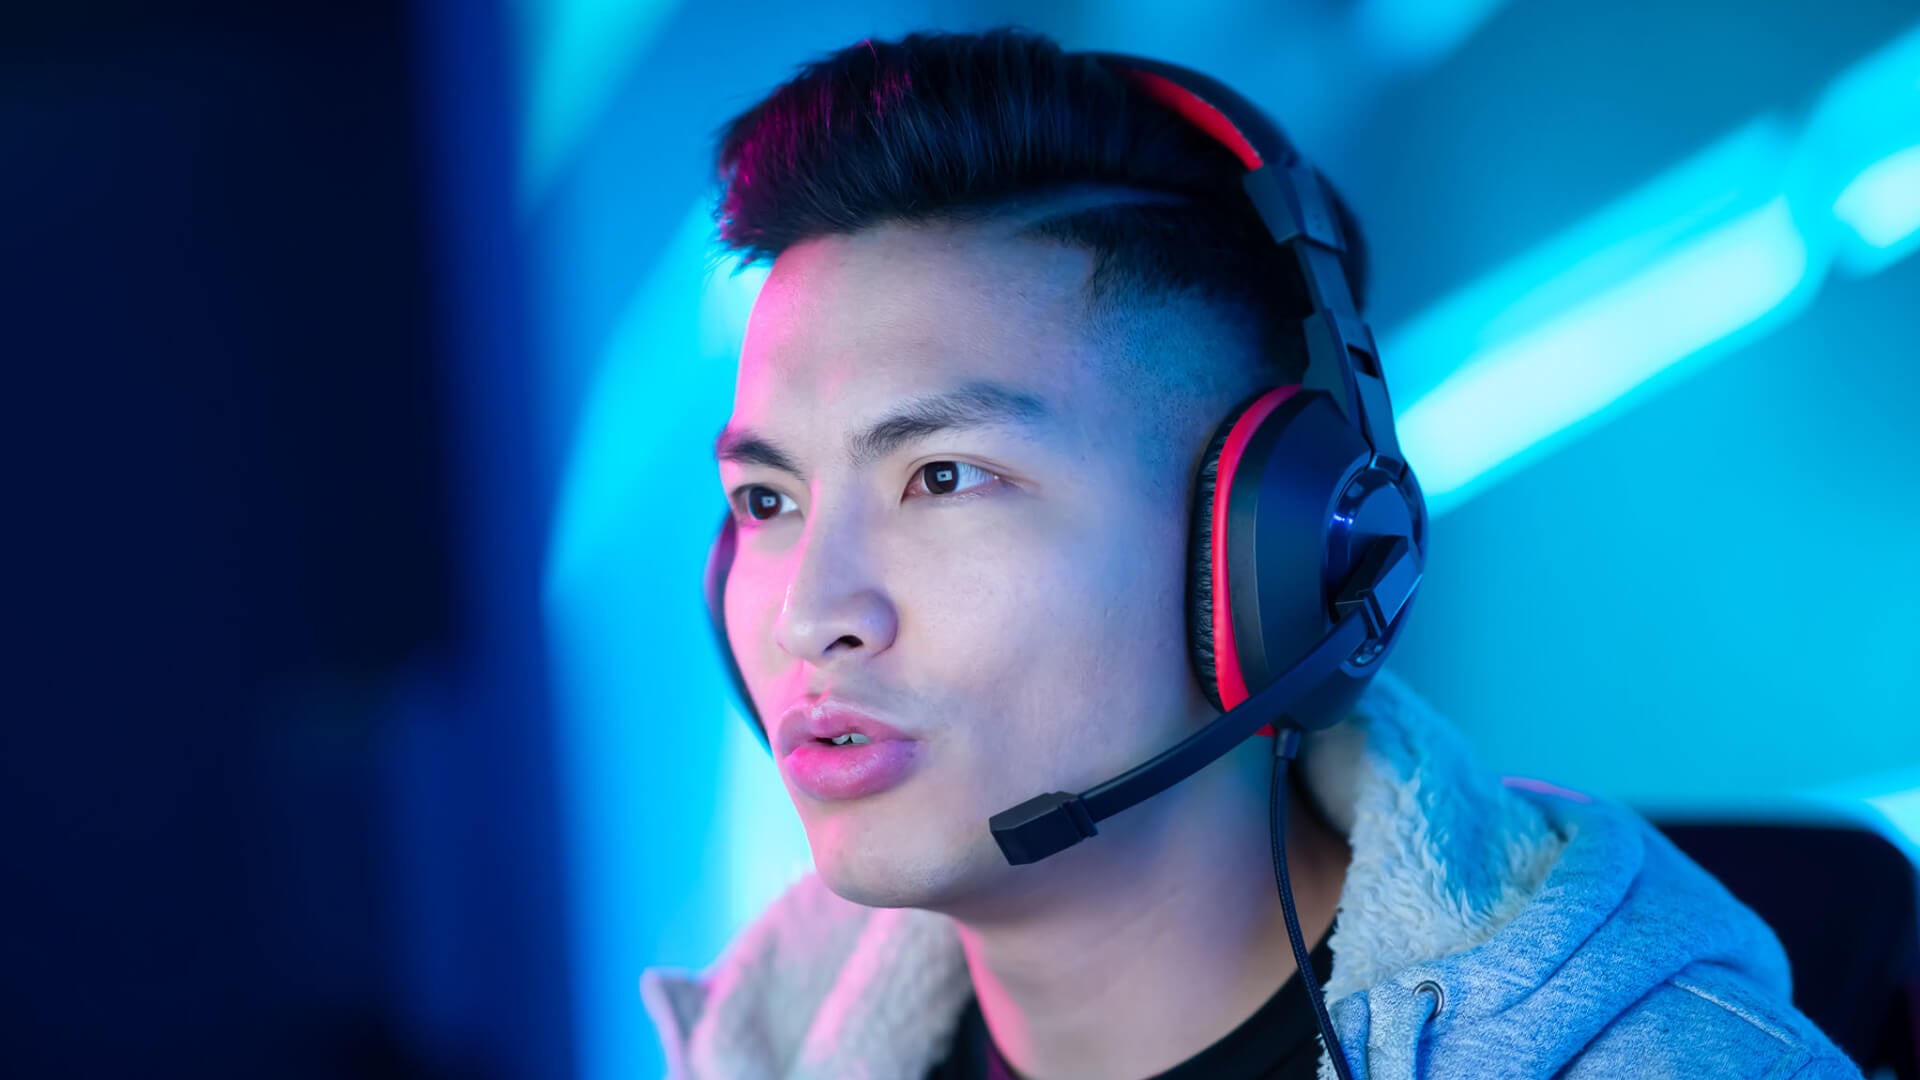 Are gaming headsets worth it